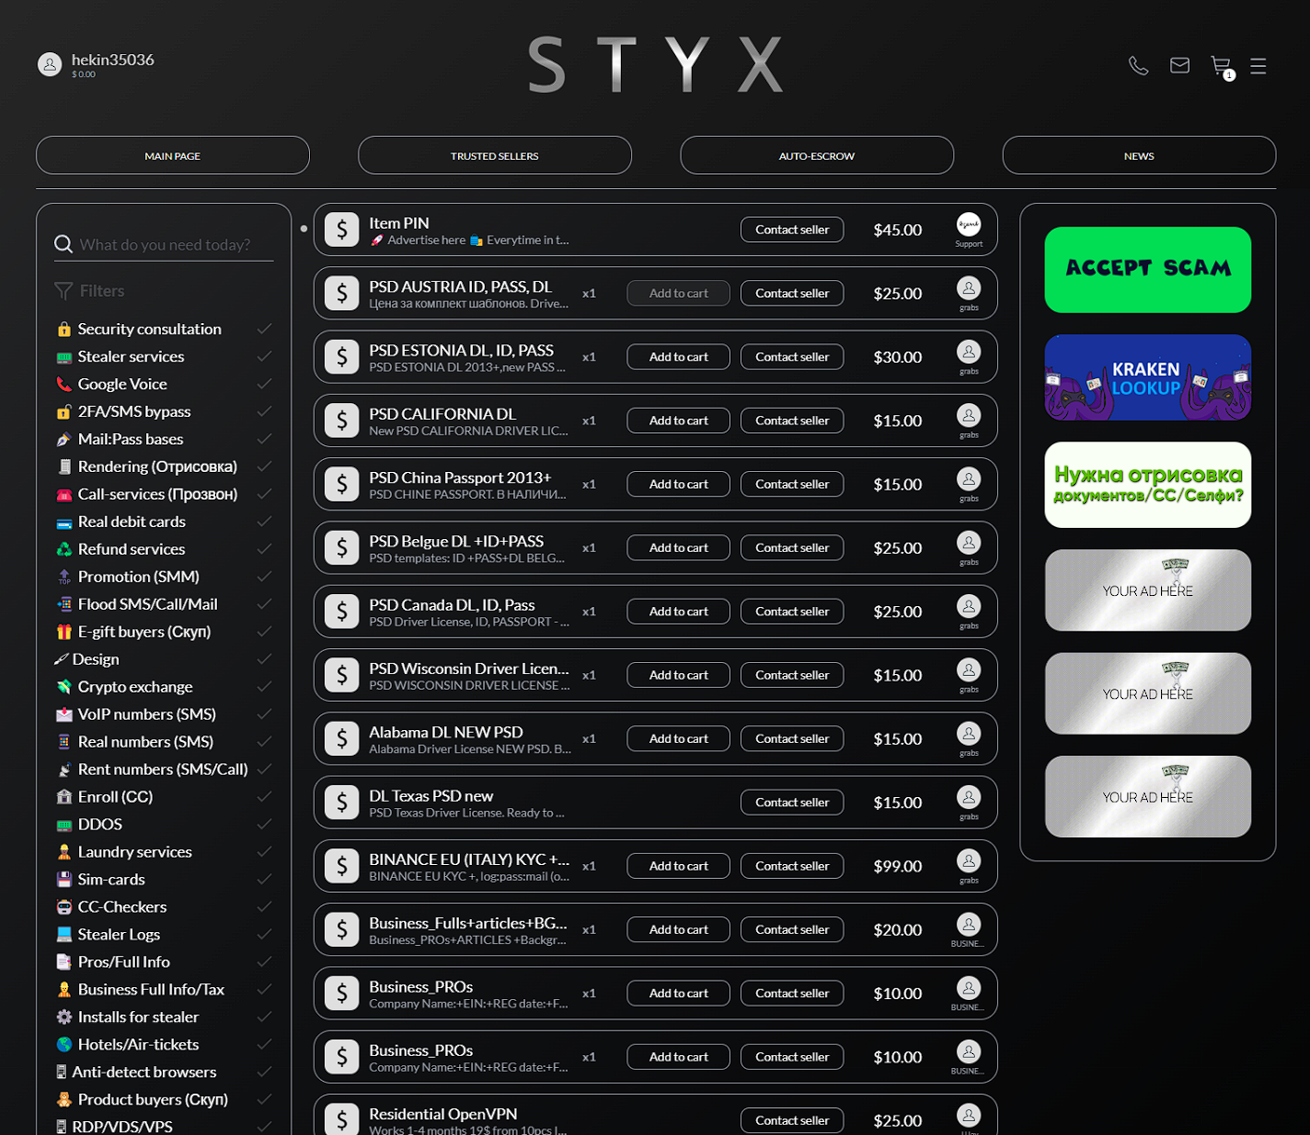 Overview of STYX with service categories on the left